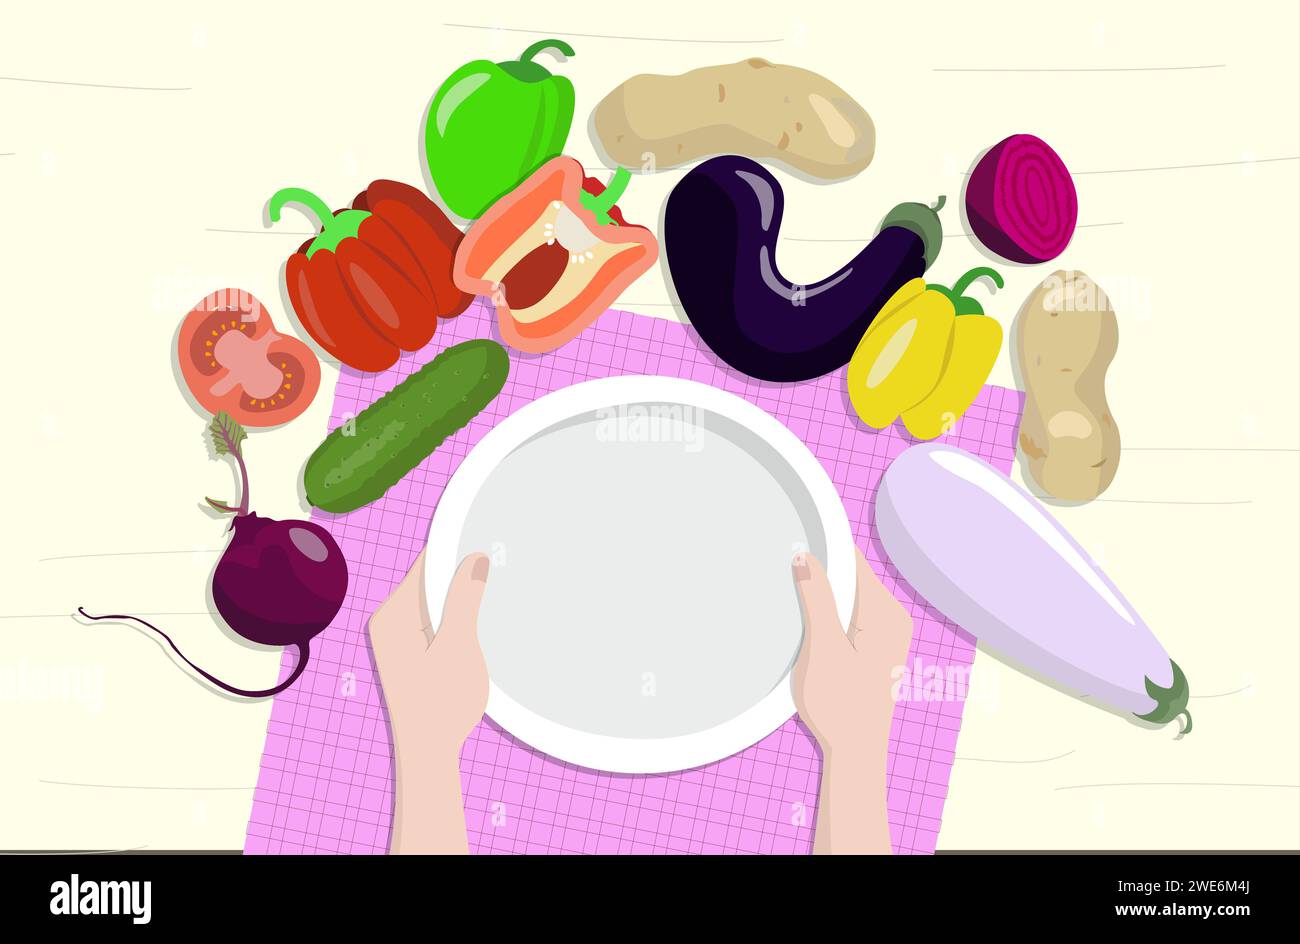 Set of vegetables and hands holding an empty plate. Kitchen illustration. Stock Vector